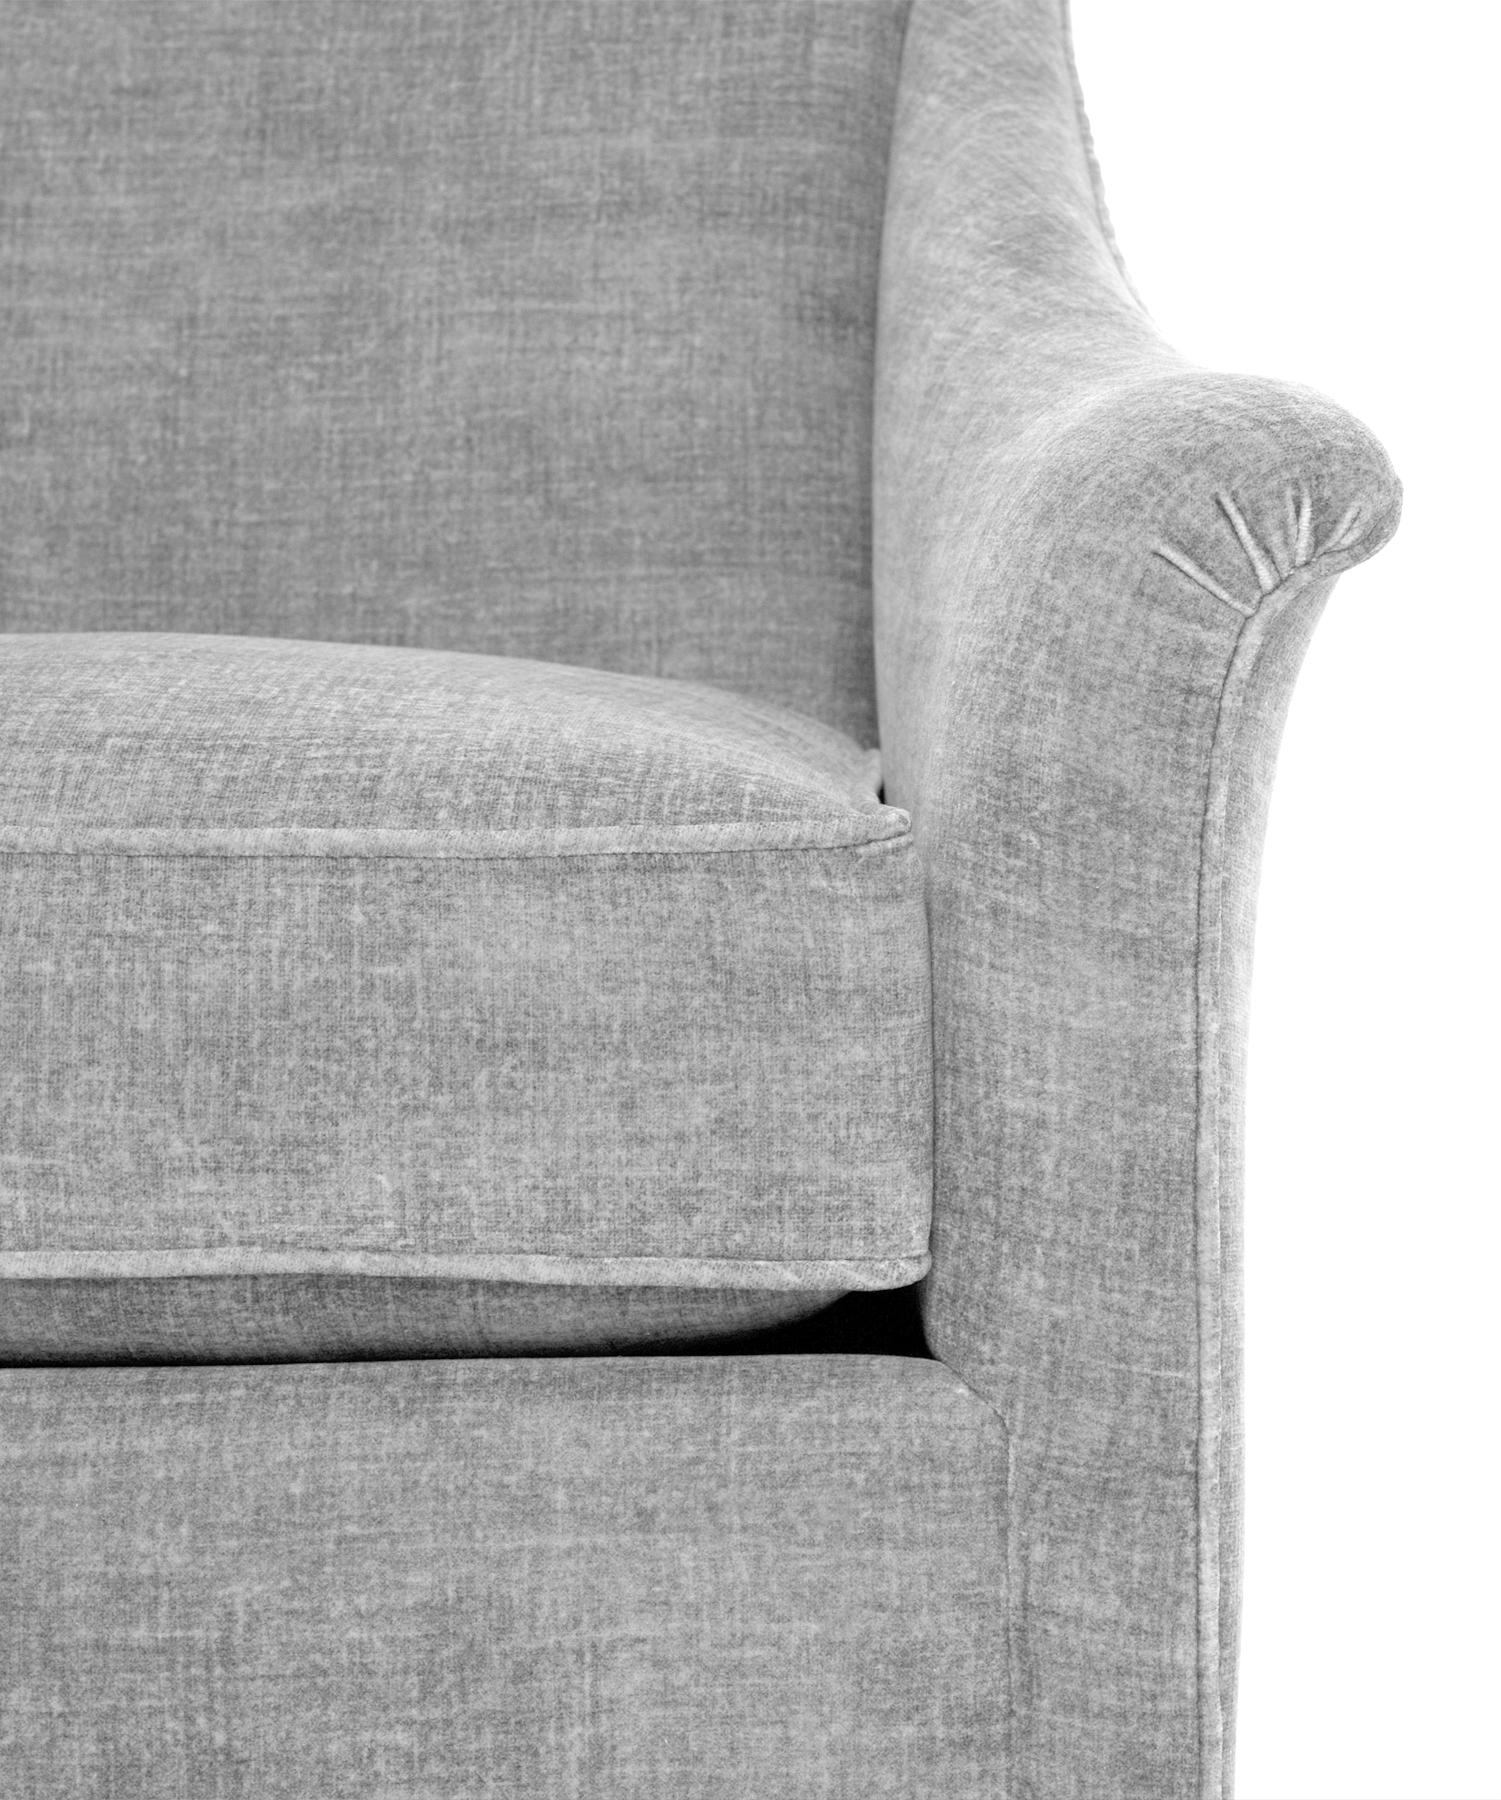 American Isabelle Upholstered Chair in Wool, Vica designed by Annabelle Selldorf